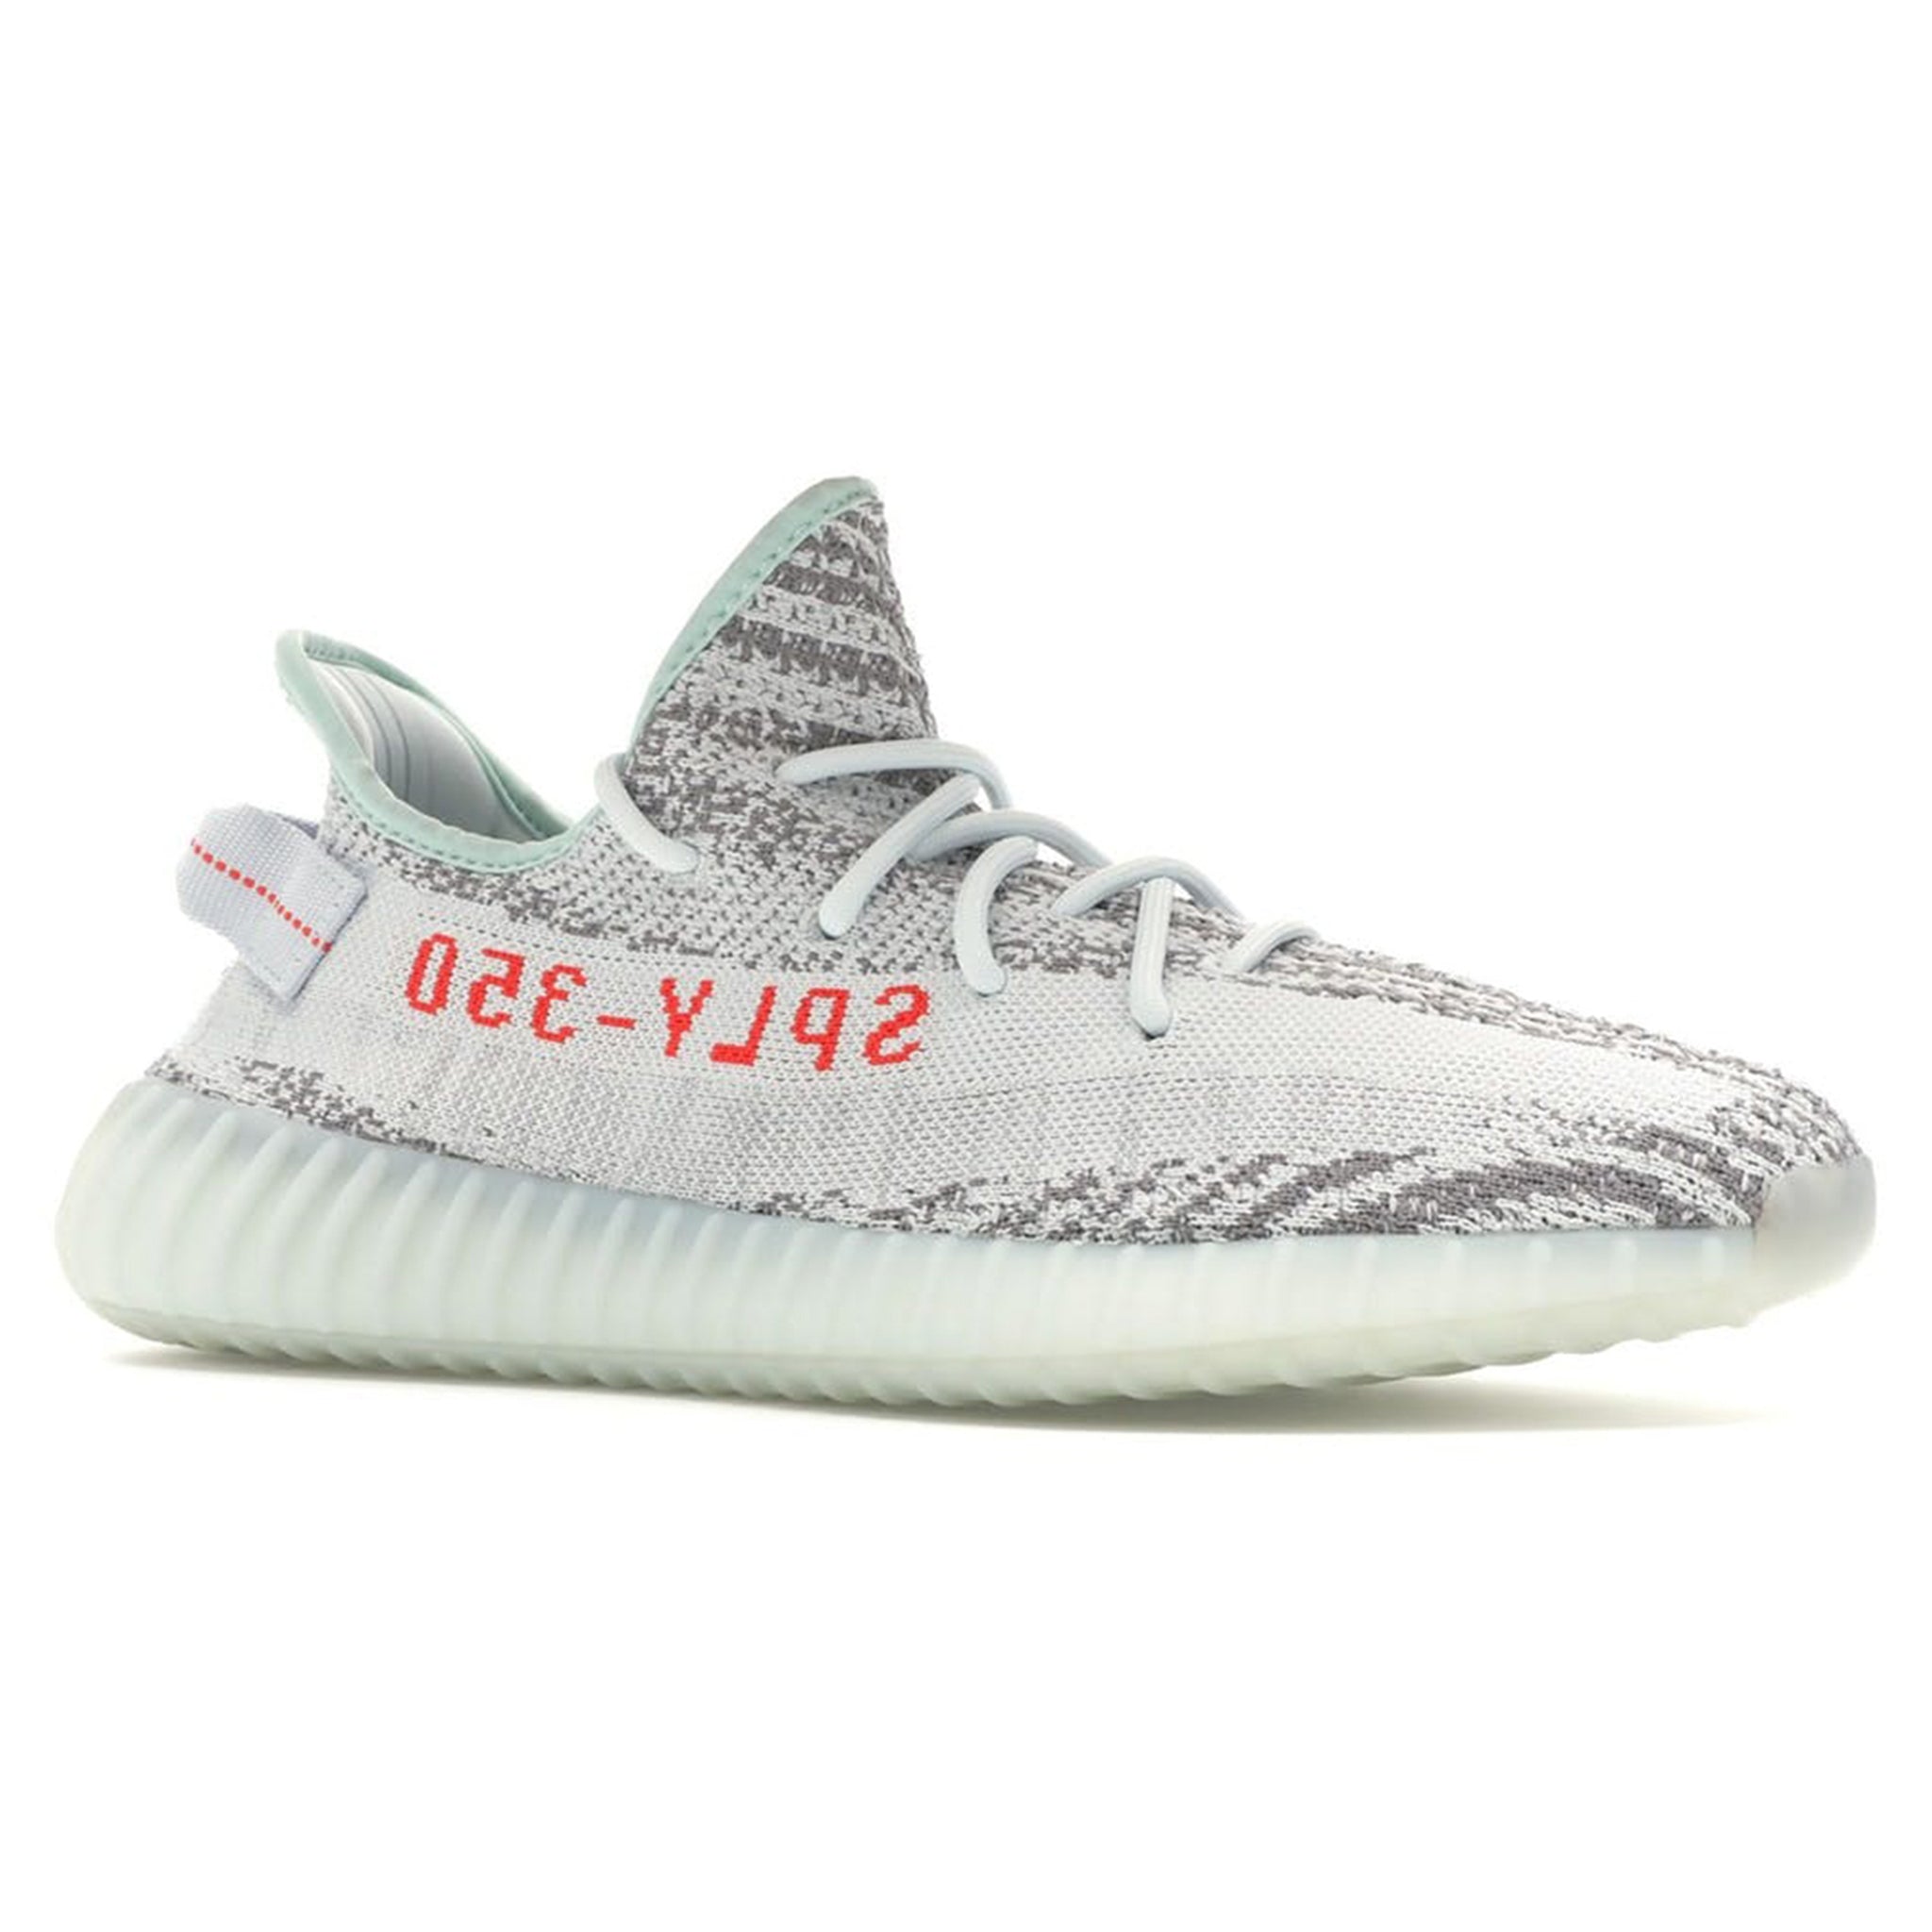 Front view of Adidas Yeezy Boost 350 V2 Blue Tint B37571